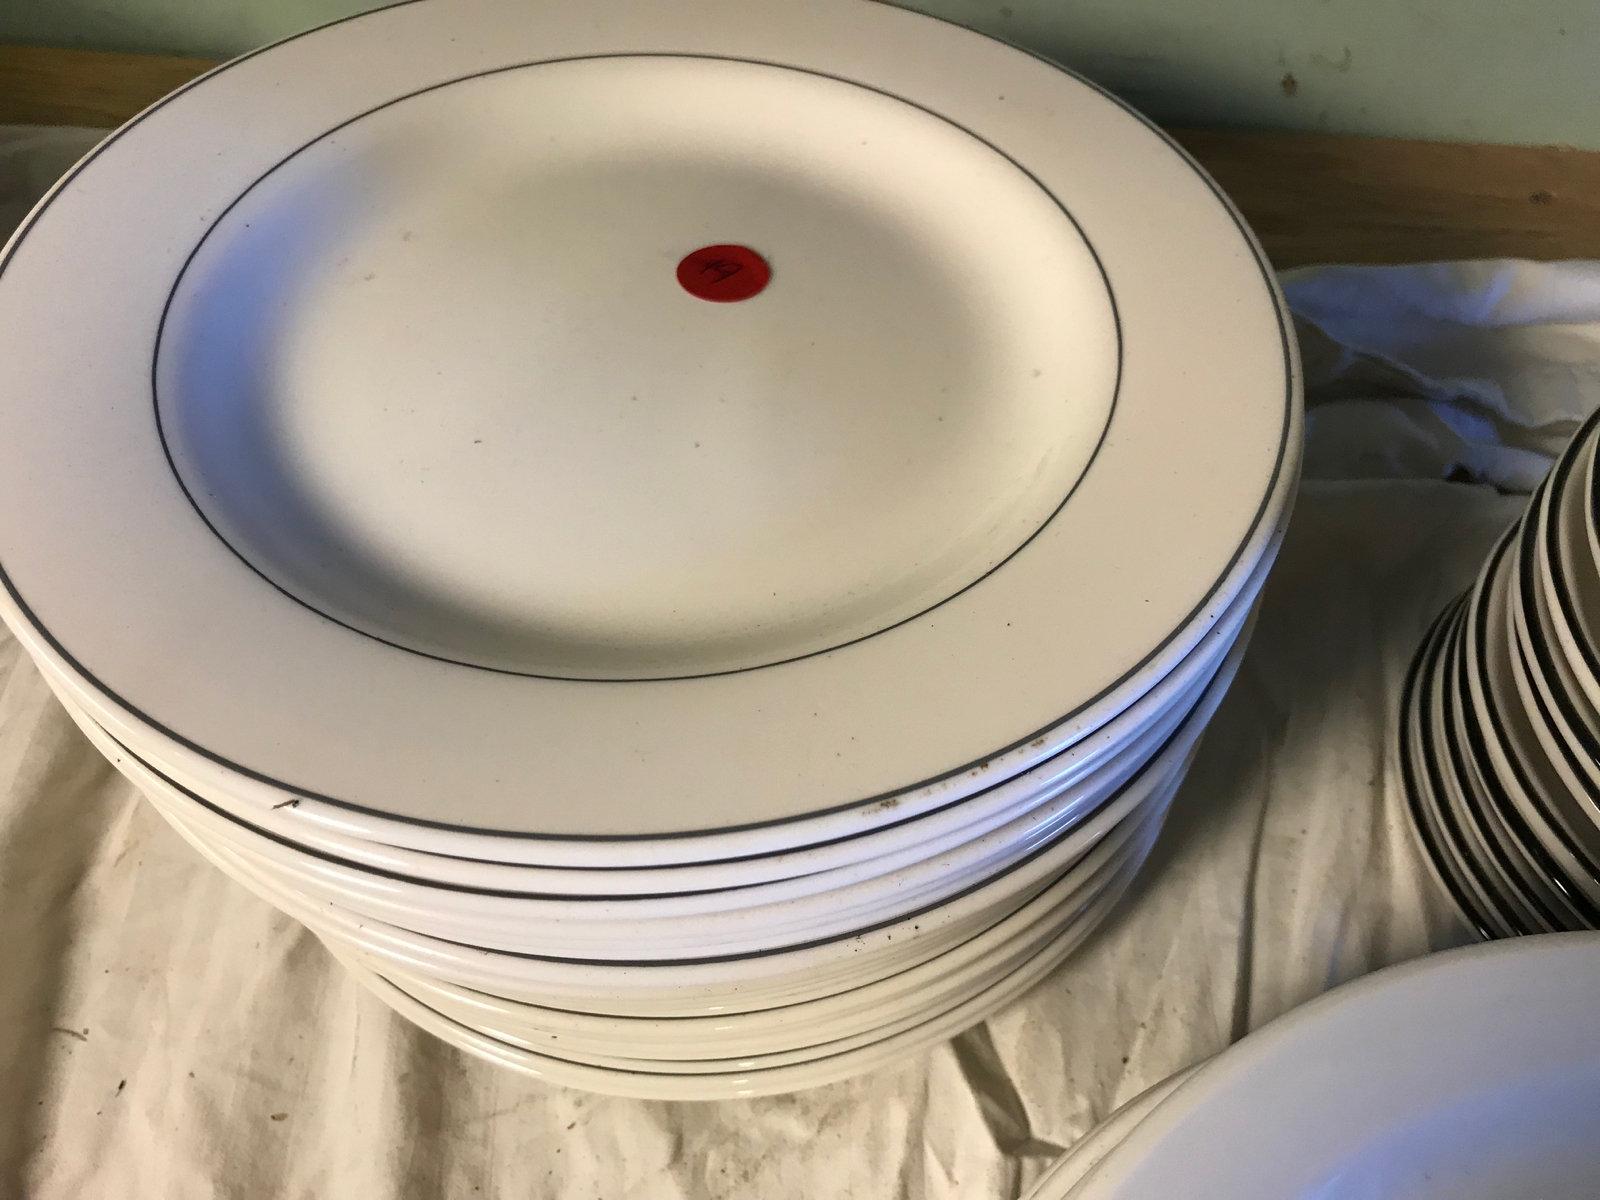 Plates and saucers with busboy tub, 16 saucers and 25 plates total